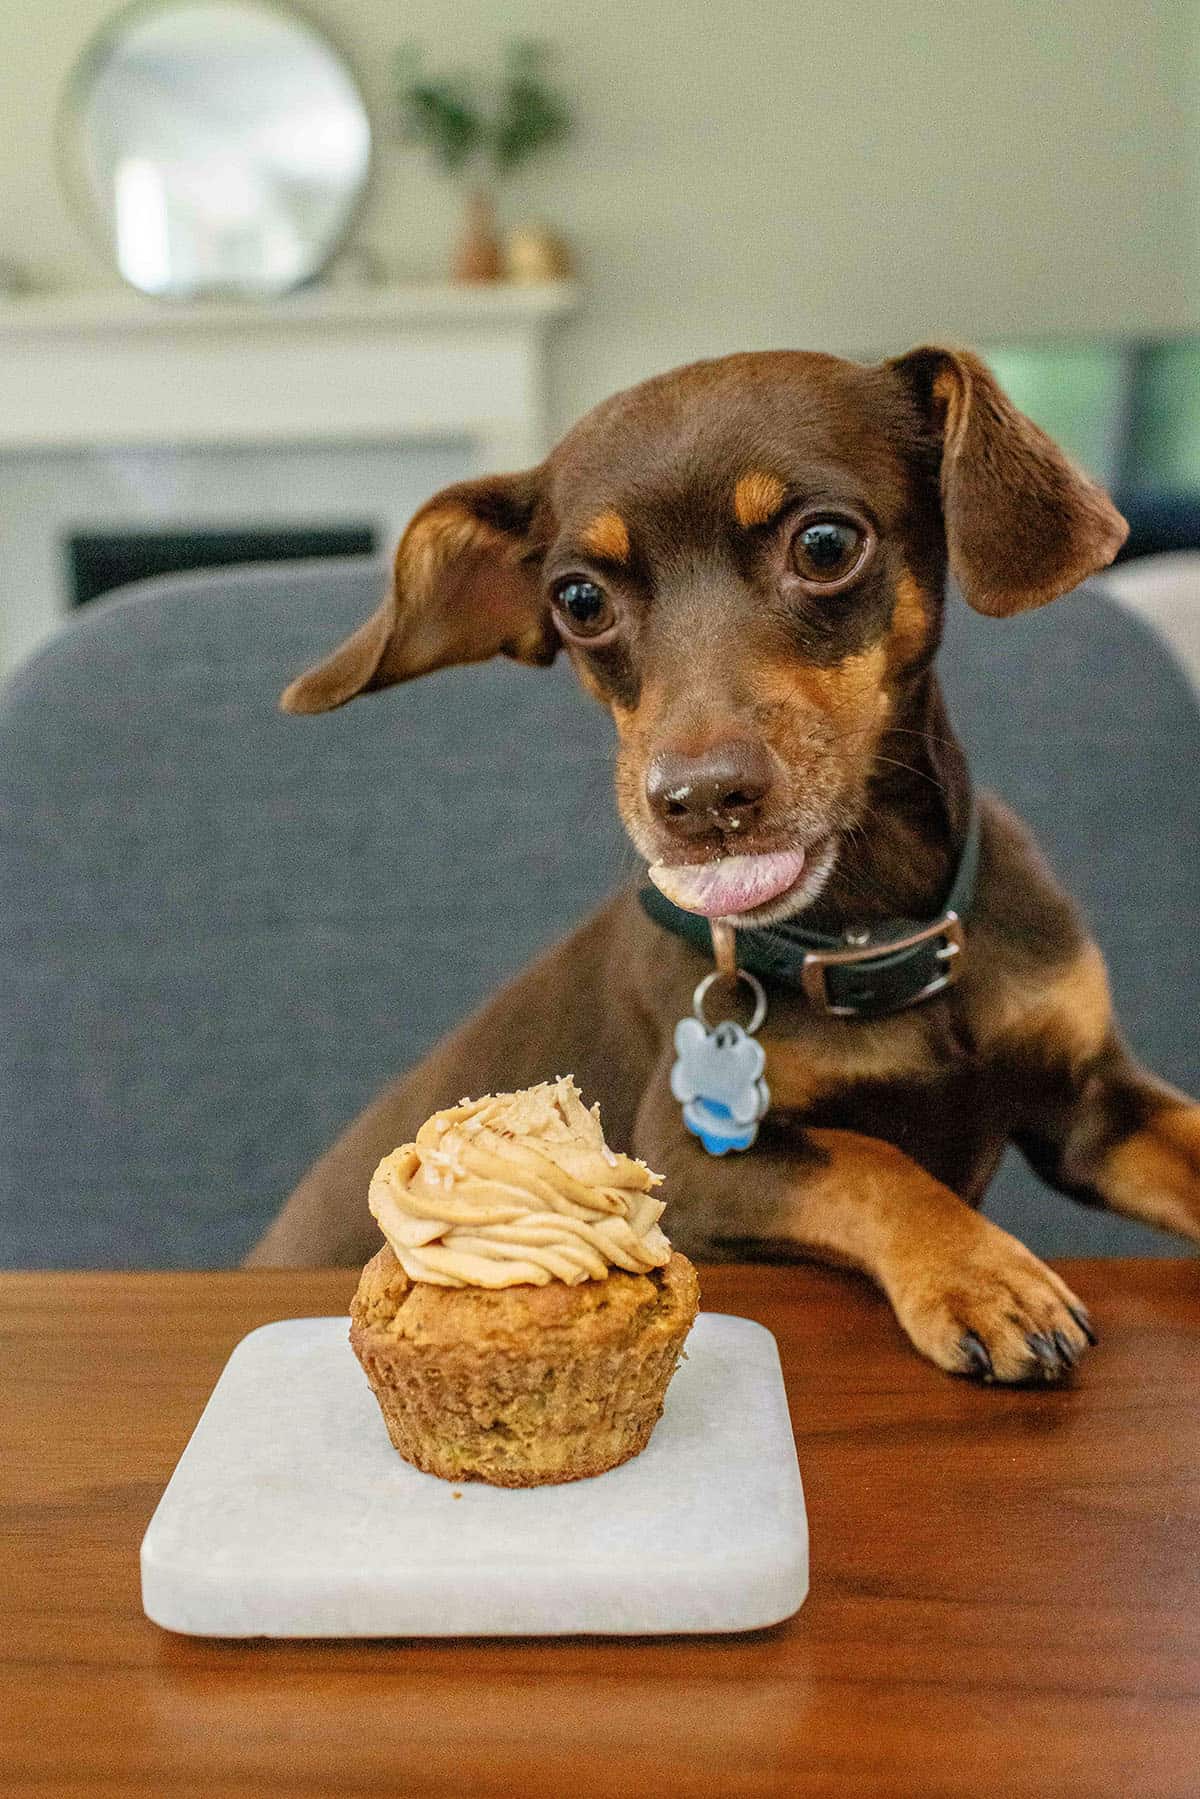 dachshund chihuahua eating dog cupcake on white square plate on dining table